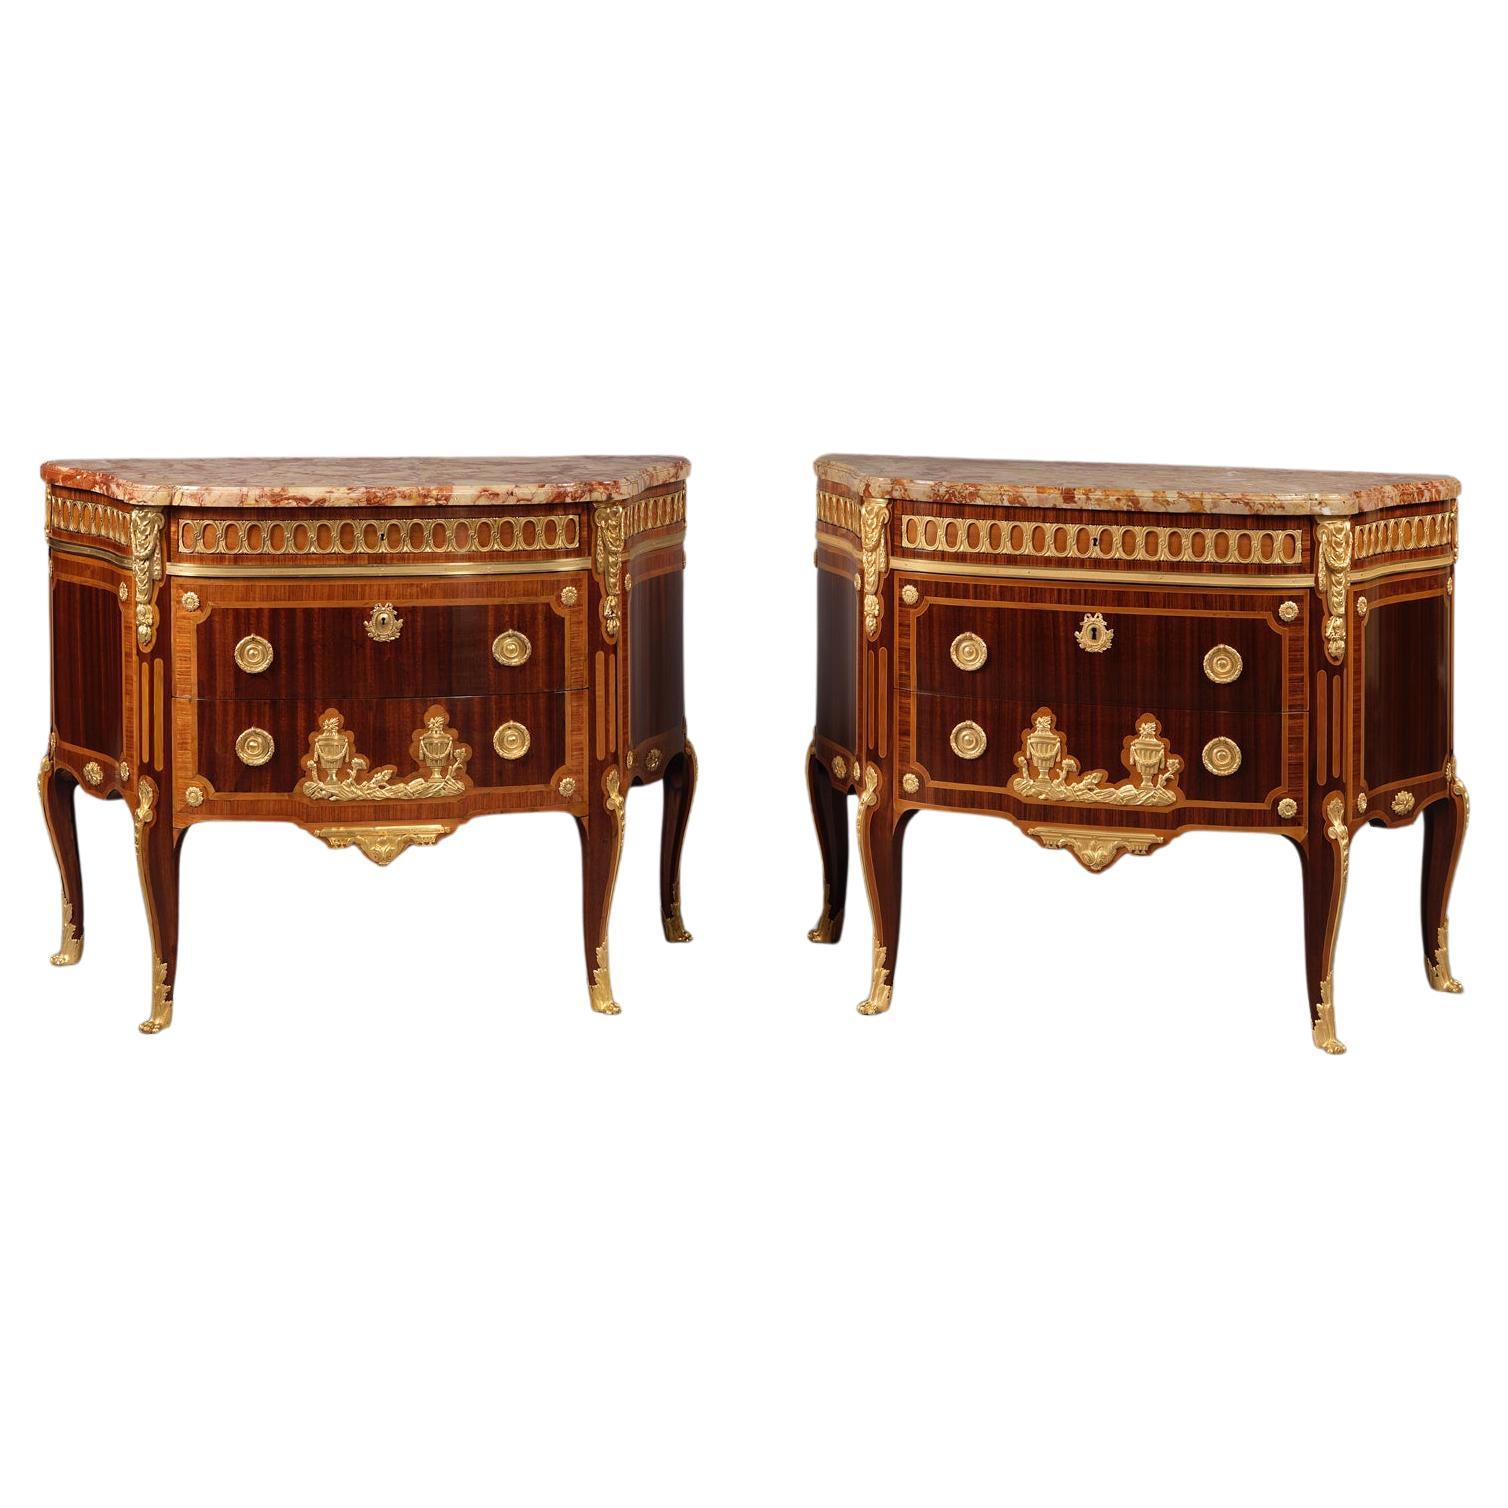 Pair of Transitional Style Parquetry Commodes, by Paul Sormani For Sale